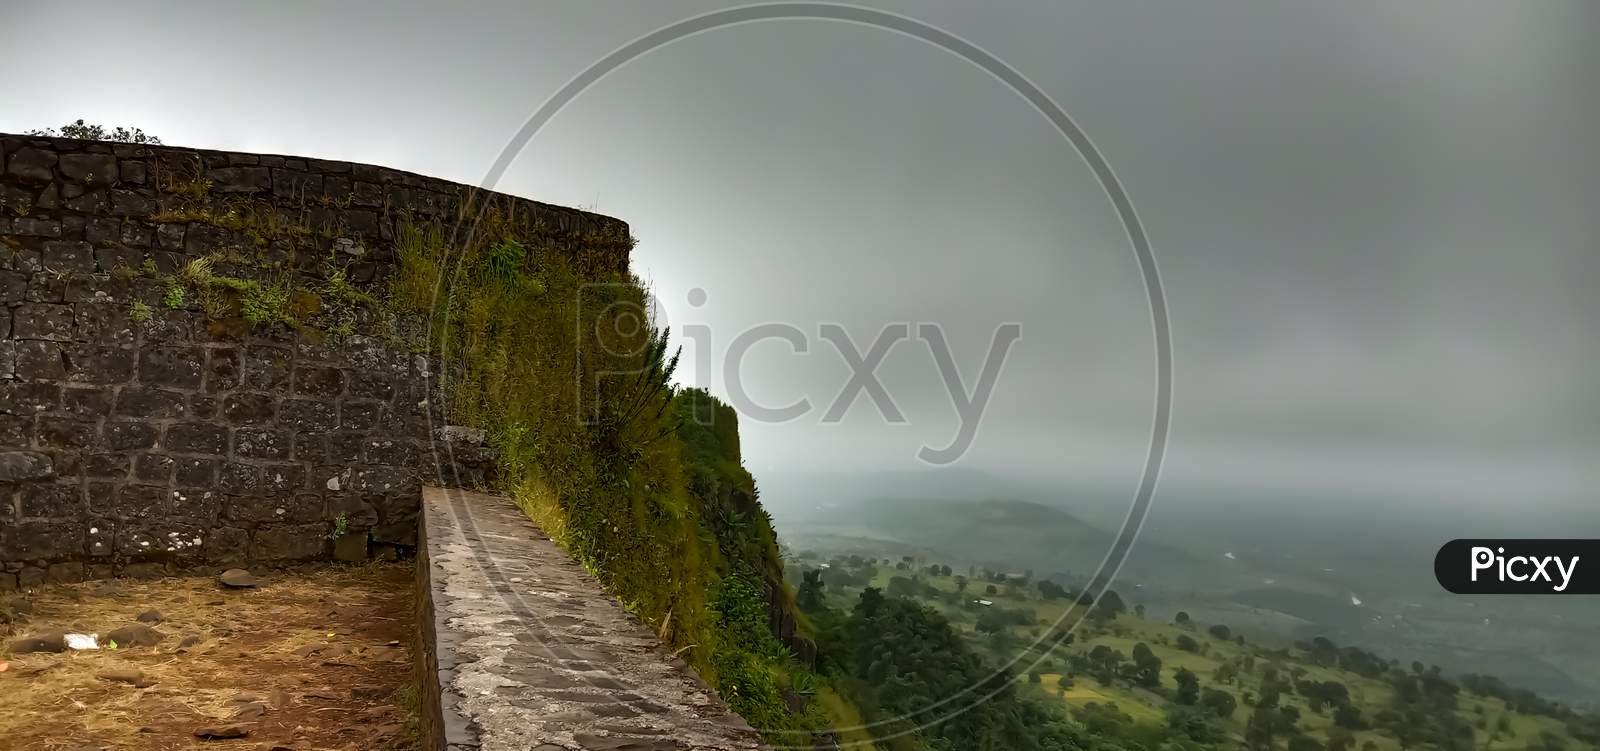 Top of fort in cloudy and rainy season.